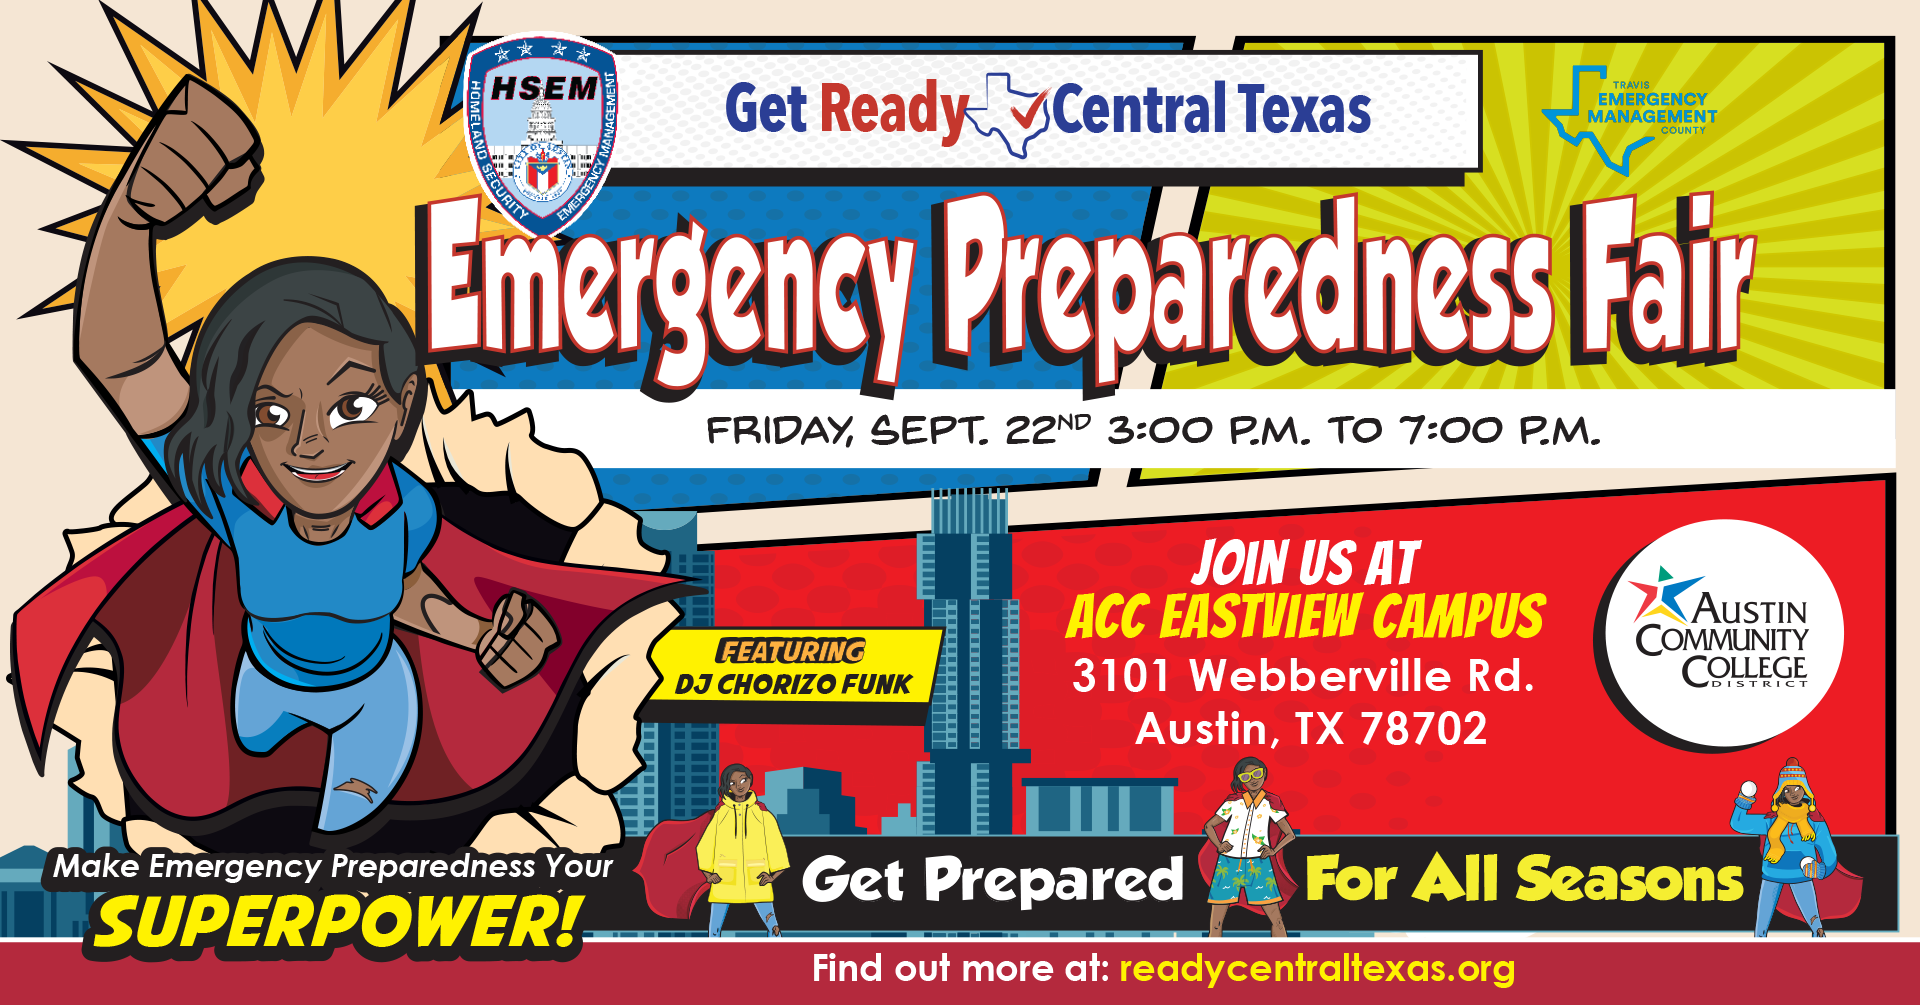 Comic strip style image. Female superhero wearing blue t-shirt and jeans with red cape flying toward foreground after bursting through the paper. Downtown Austin skyline in background. Text on image: Emergency Preparedness Fair. Friday, Sept. 22nd, 3:00 pm to 7:00 pm. Join us at ACC Eastview Campus 3101 Webberville Rd., Austin, TX, 78702. Featuring DJ Chorizo Funk. Make emergency preparedness your superpower! Get prepared for all seasons. Find out more at ReadyCentralTexas.org.  